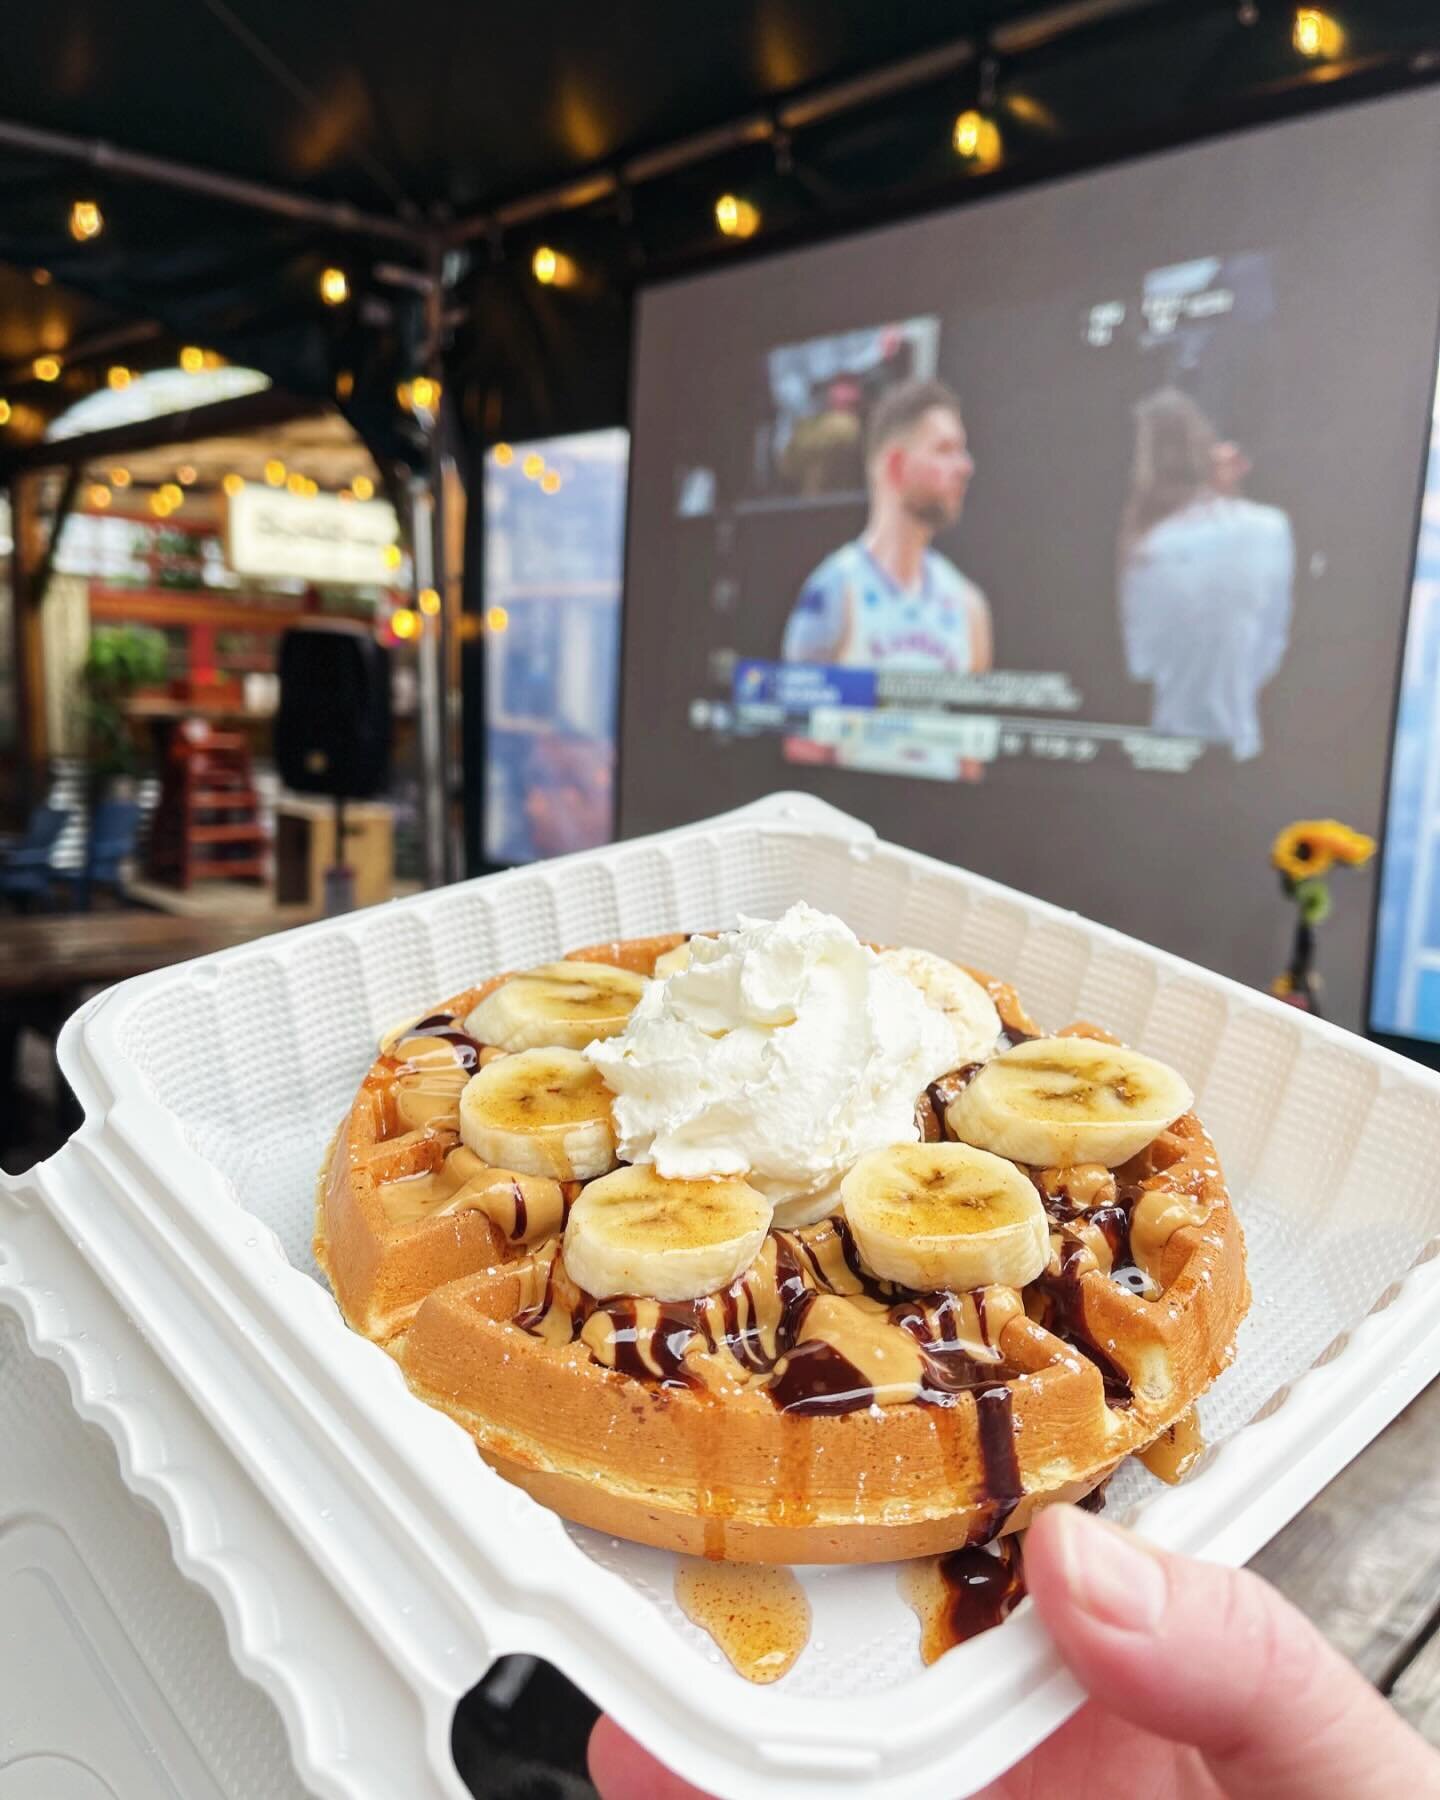 It&rsquo;s Saturday! There&rsquo;s basketball on and we&rsquo;ve got our GF Belgian Waffle the Fat Elvis 🕺 🪩 today! 

Stop by @arborlookcarts before they&rsquo;re all gone! We&rsquo;re open from 12p-8p unless we sell out! And don&rsquo;t forget&hel